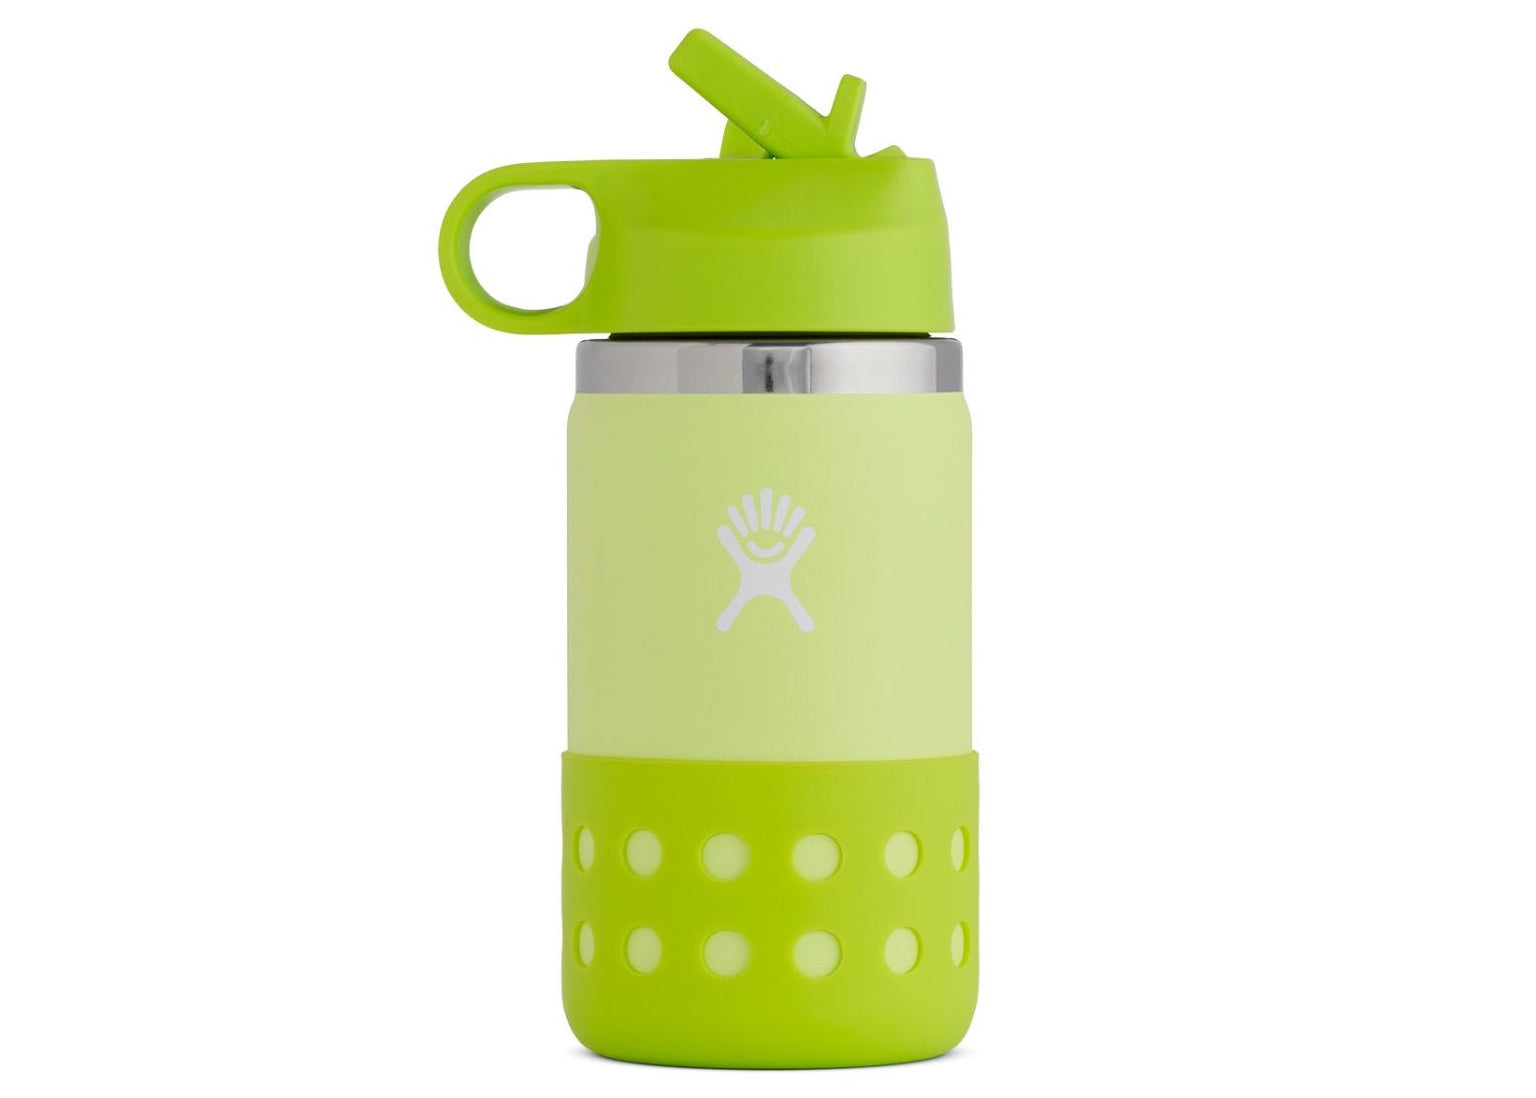 Hydro Flask Kids Insulated Lunch Box Small - Paradise